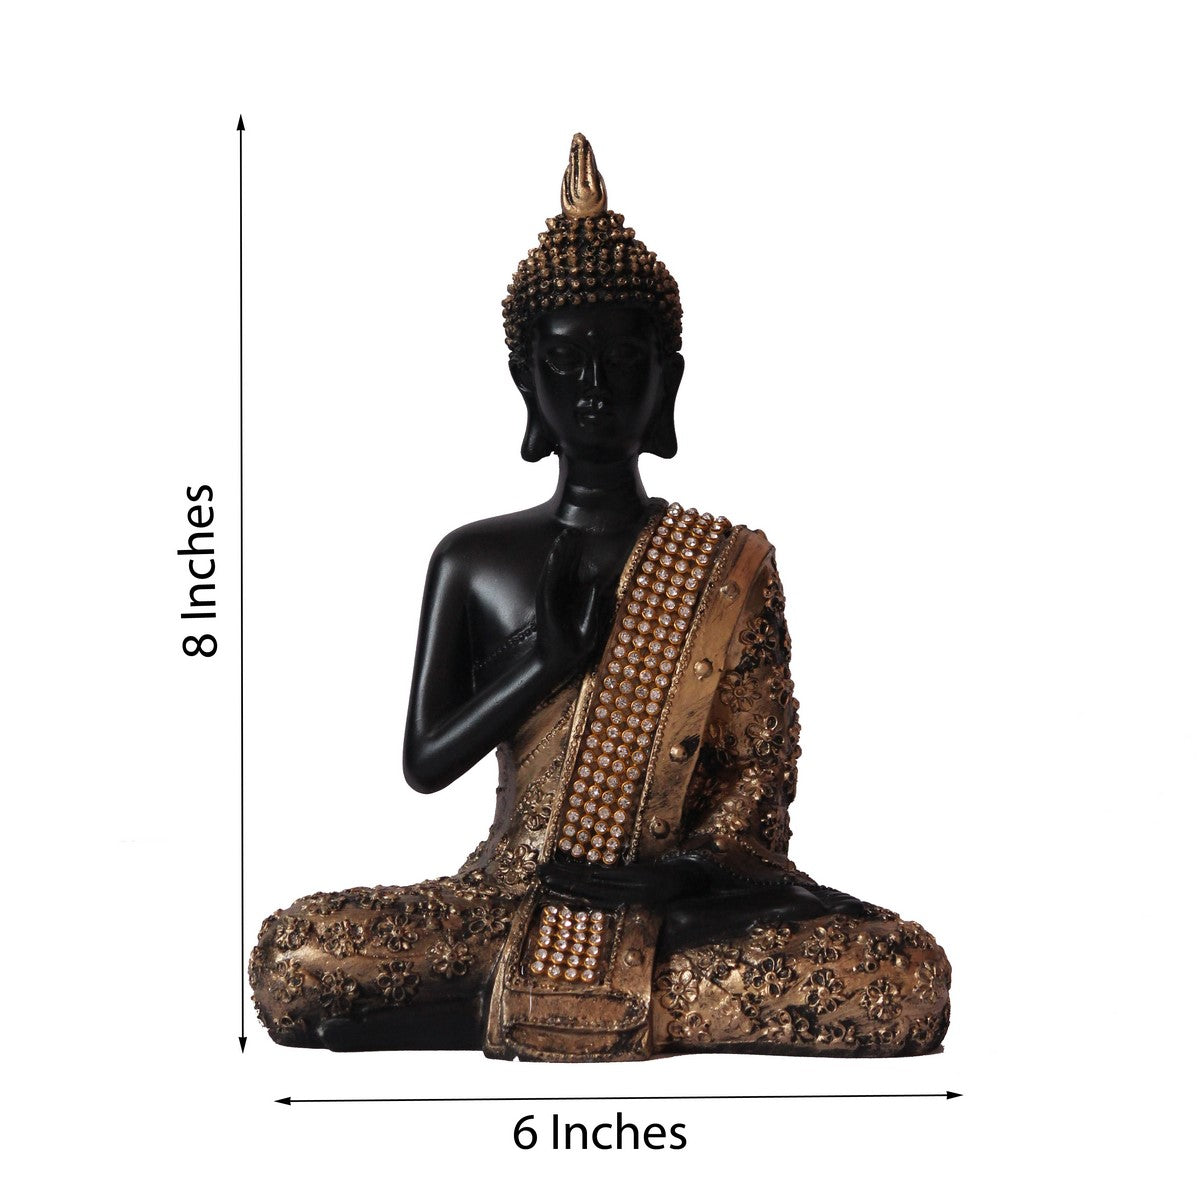 Polyresin Black and Golden Handcrafted Meditating Blessing Buddha Statue 2